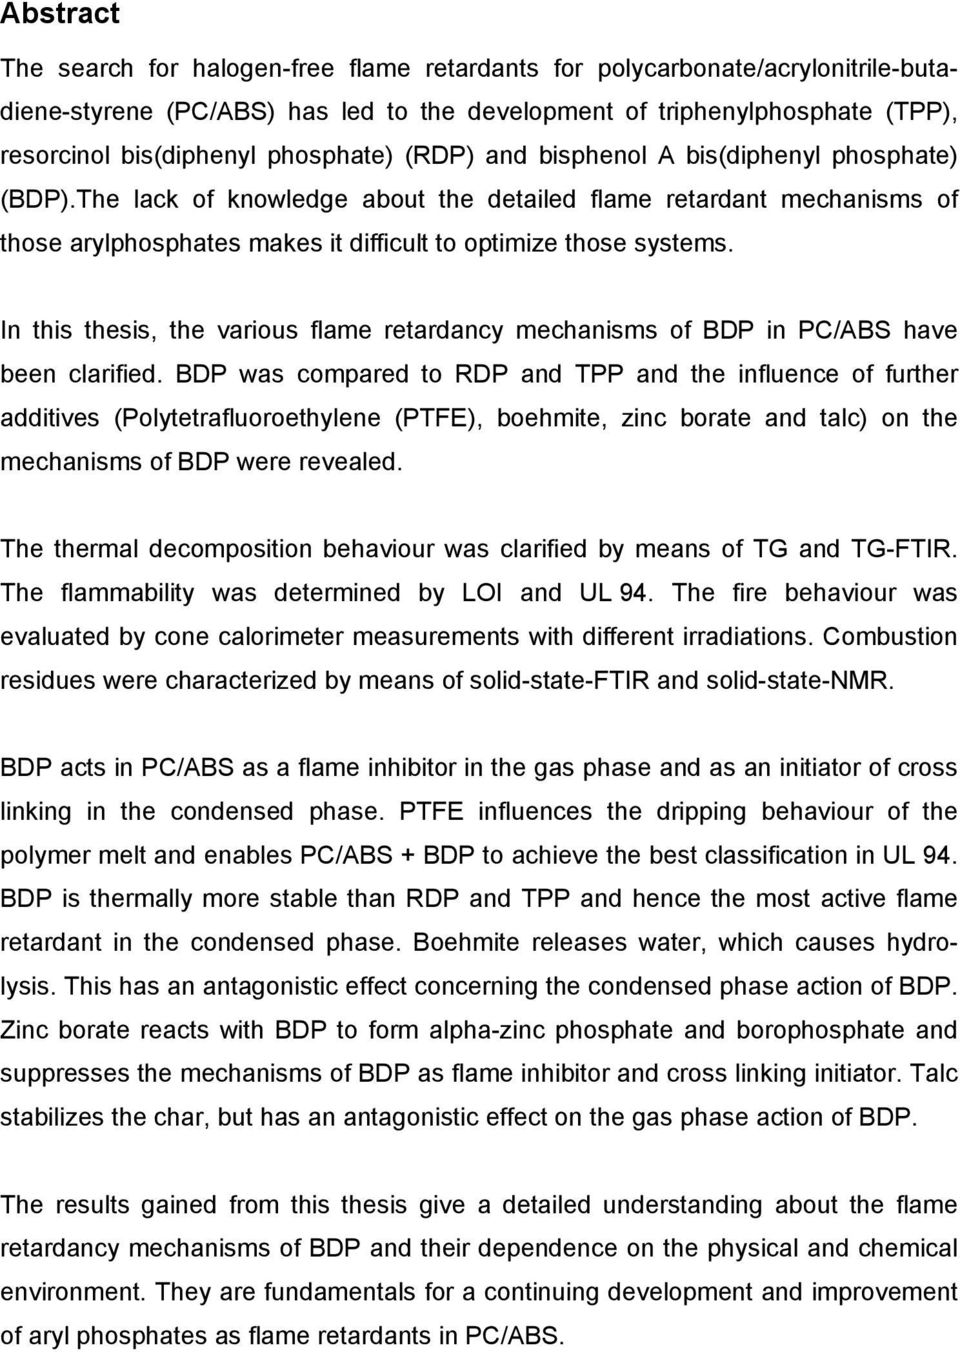 In this thesis, the various flame retardancy mechanisms of BDP in PC/ABS have been clarified.